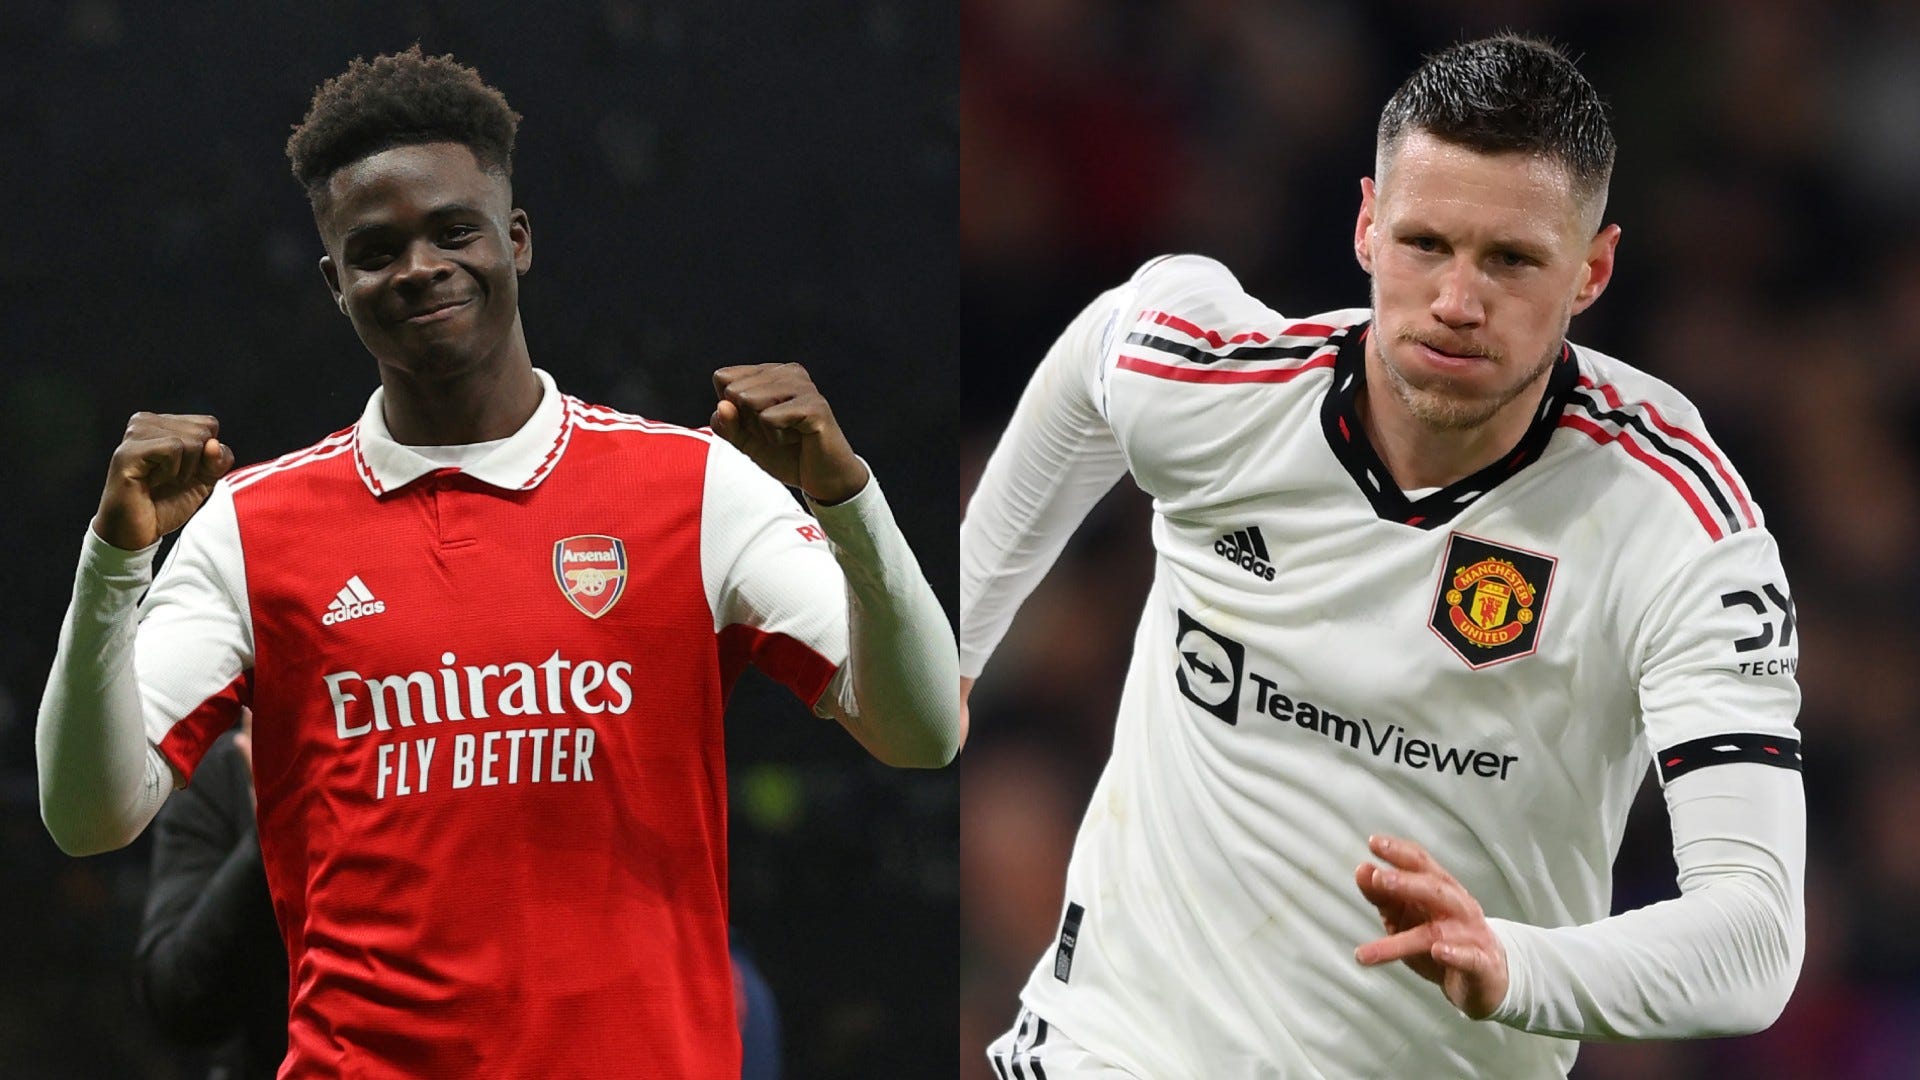 Arsenal vs Manchester United Live stream, TV channel, kick-off time and where to watch Goal English Bahrain